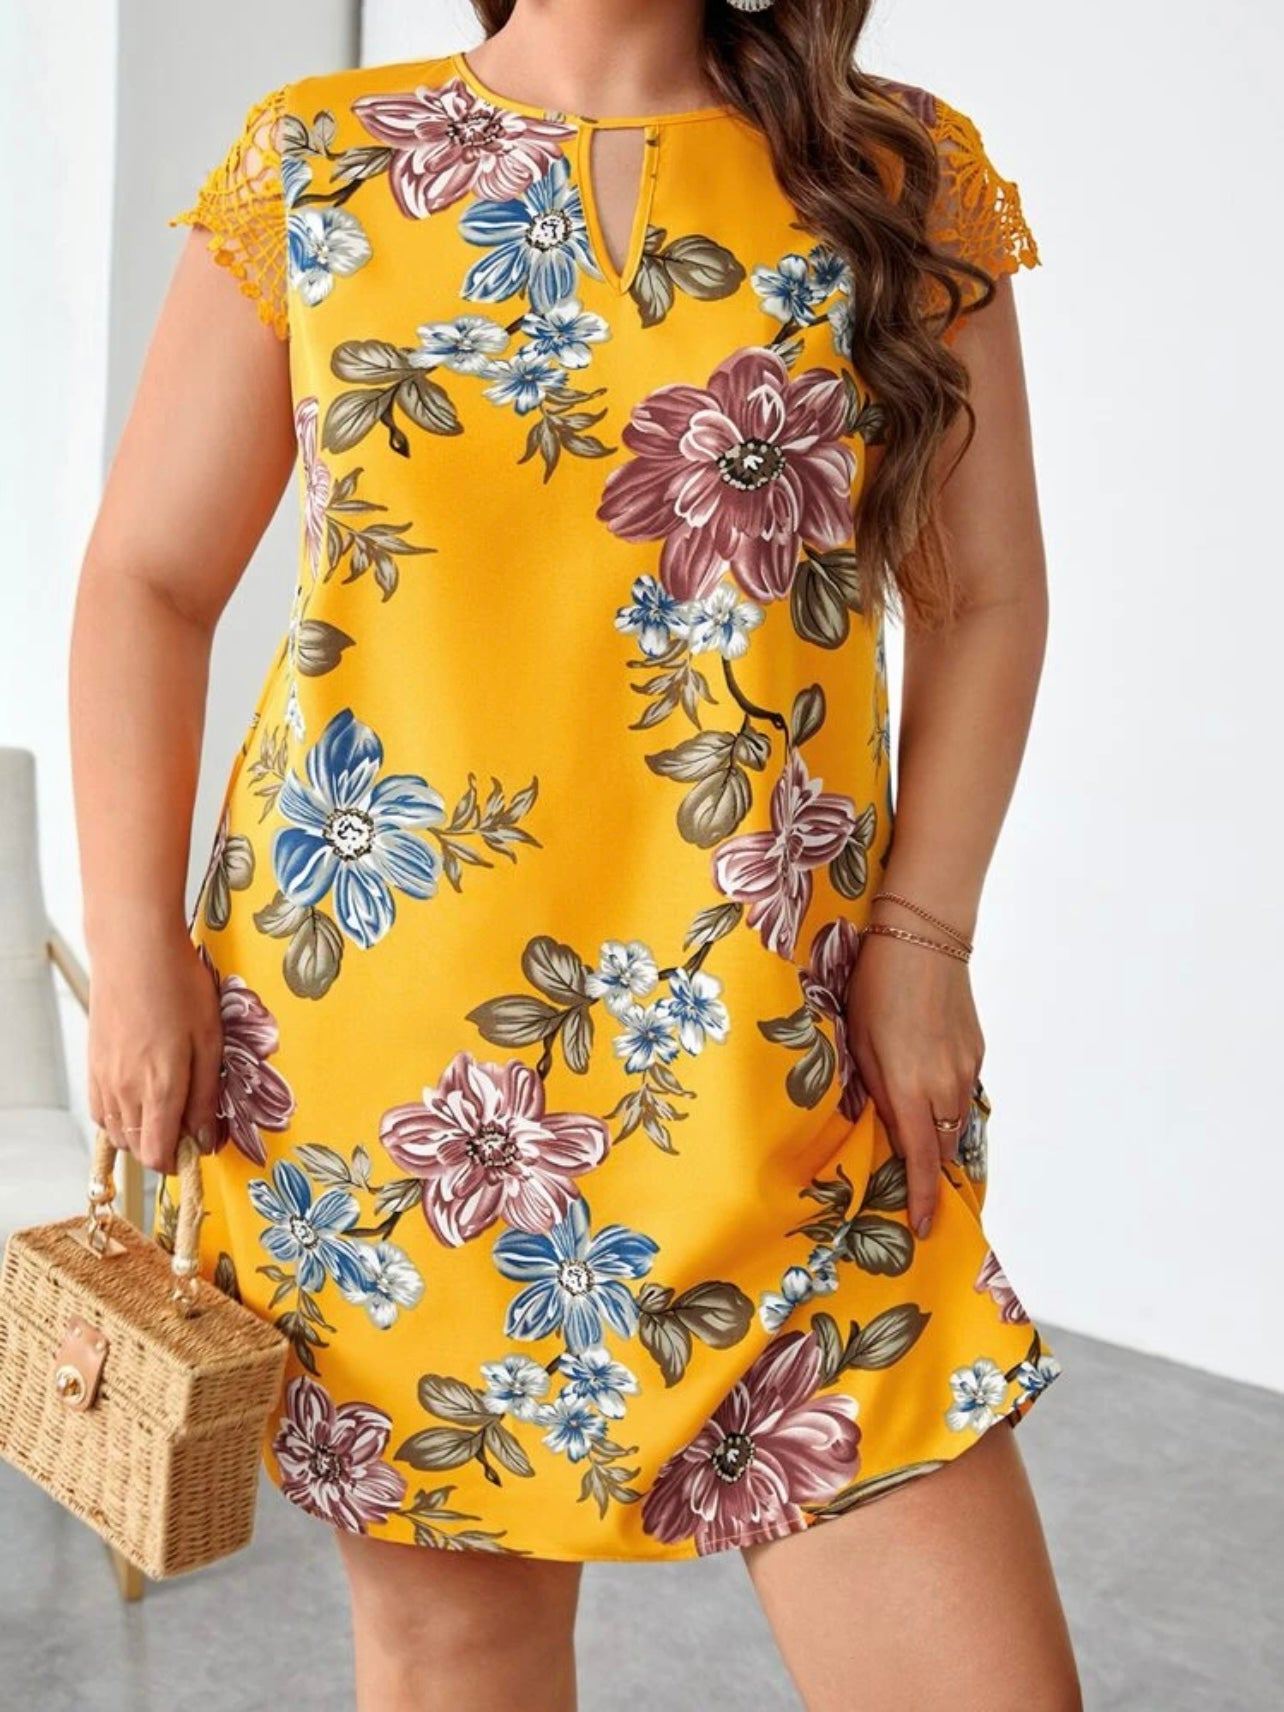 Embroidery Lace Sleeve Floral Plus Size Dress